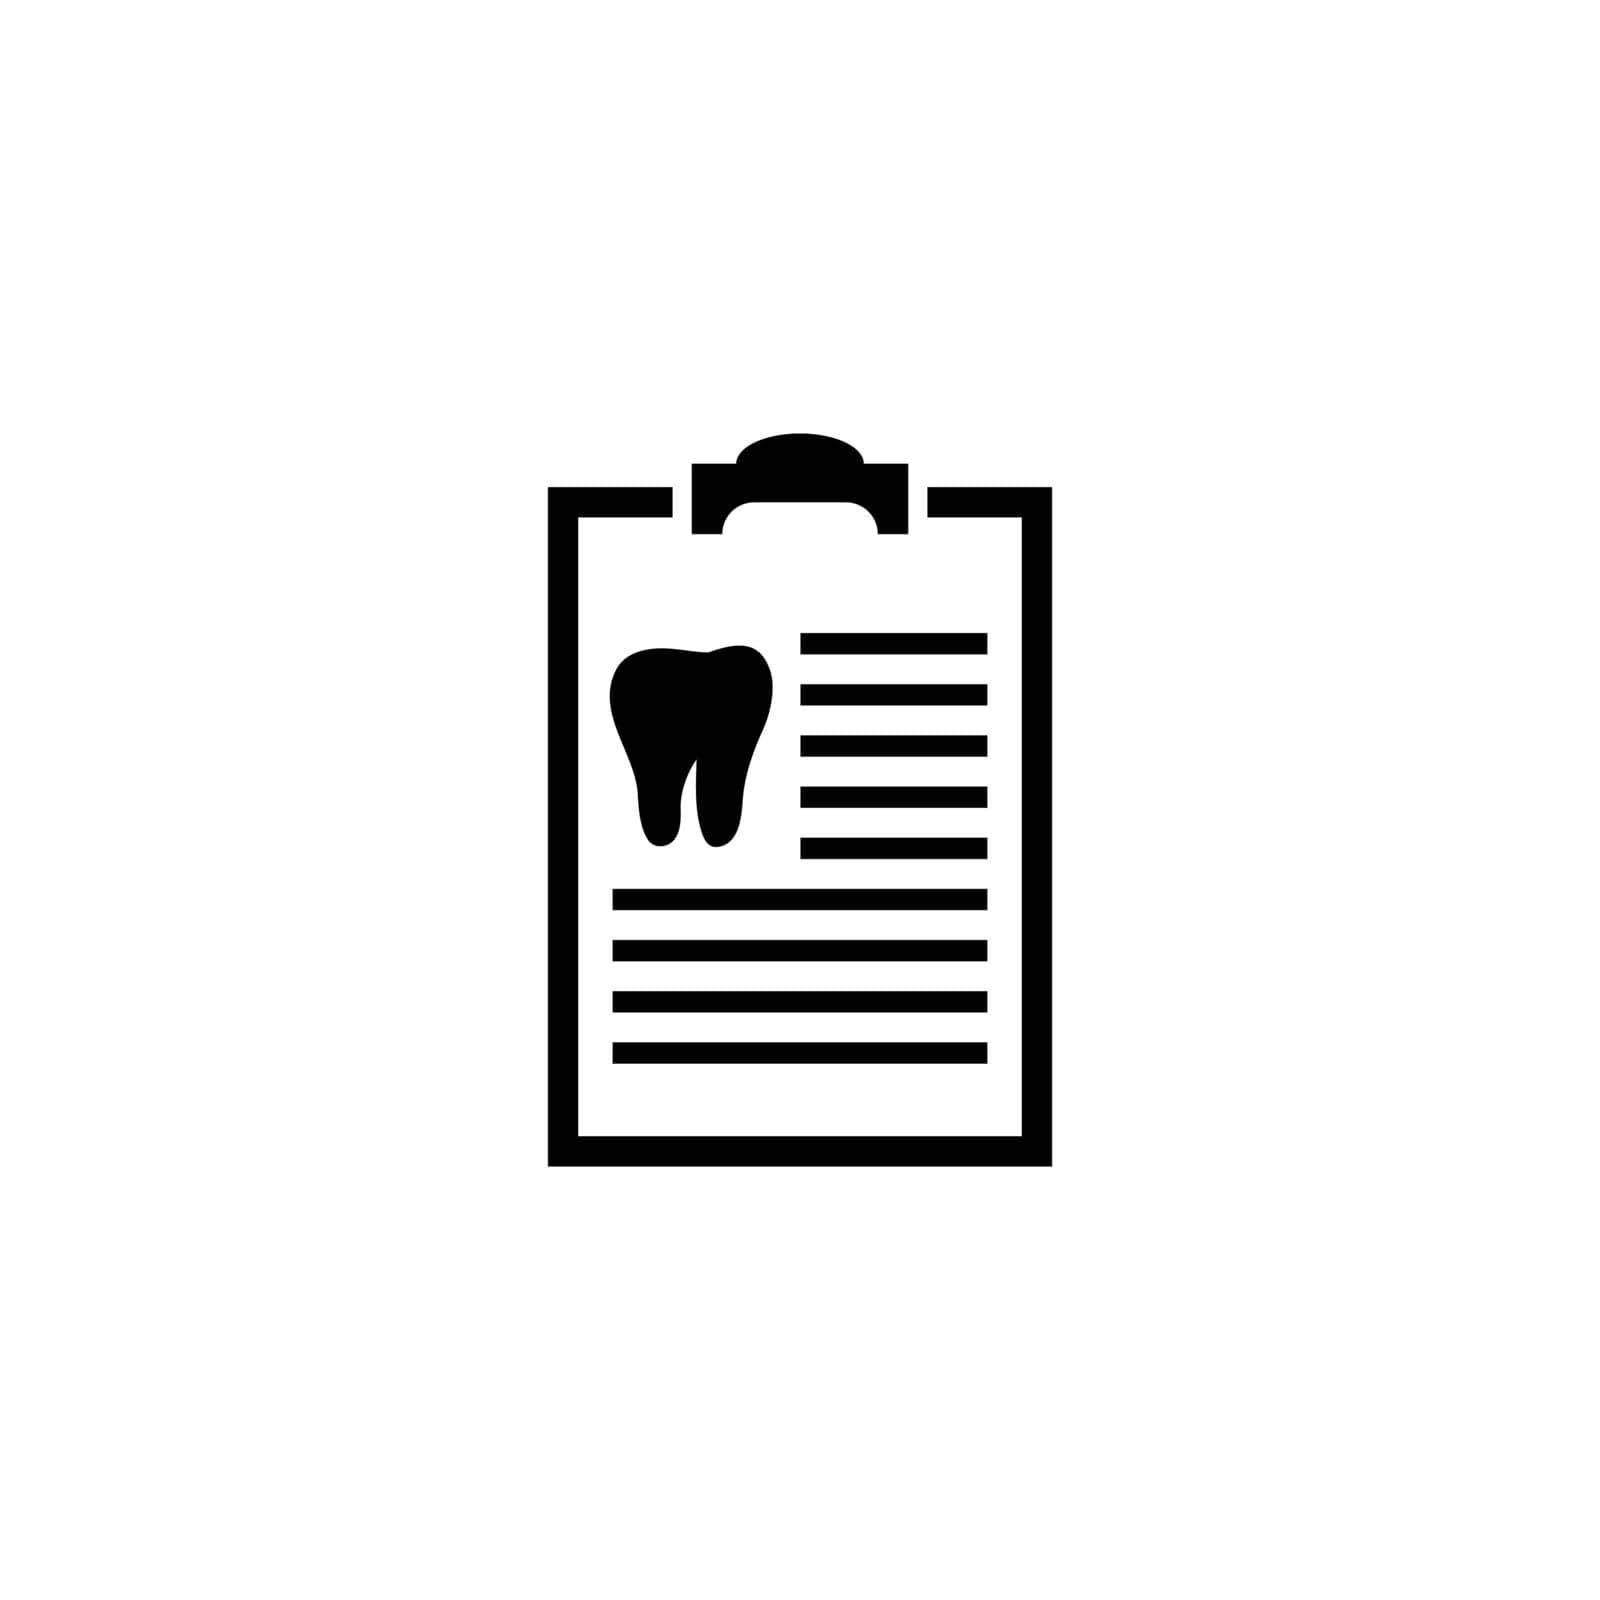 Docs Dental Checklist, Teeth Diagnostic Report. Flat Vector Icon illustration. Simple black symbol on white background. Dental Checklist Teeth Report sign design template for web and mobile UI element